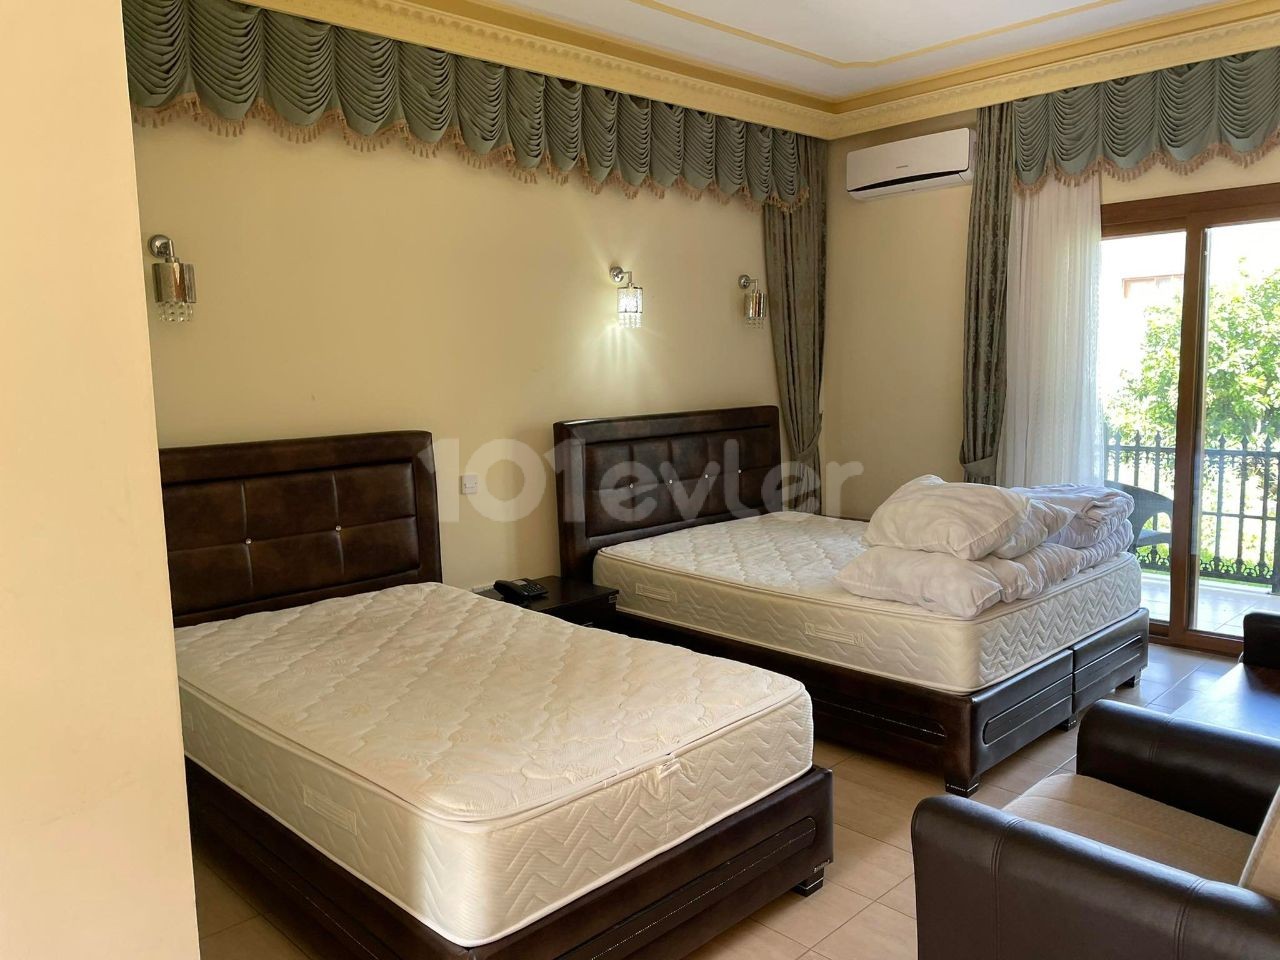 SPACIOUS STUDIO APARTMENTS IN TOUCH WITH NATURE. . .  FULLY FURNISHED, FULLY FURNISHED, INVERTER AIR CONDITIONING, JACUZZI, SPACIOUS WARDROBES WITH MANY ADVANTAGES SUCH AS SPACIOUS WARDROBES, SPACIOUS STUDIO APARTMENTS IN THE ALSANCAK REGION OF GİRNE